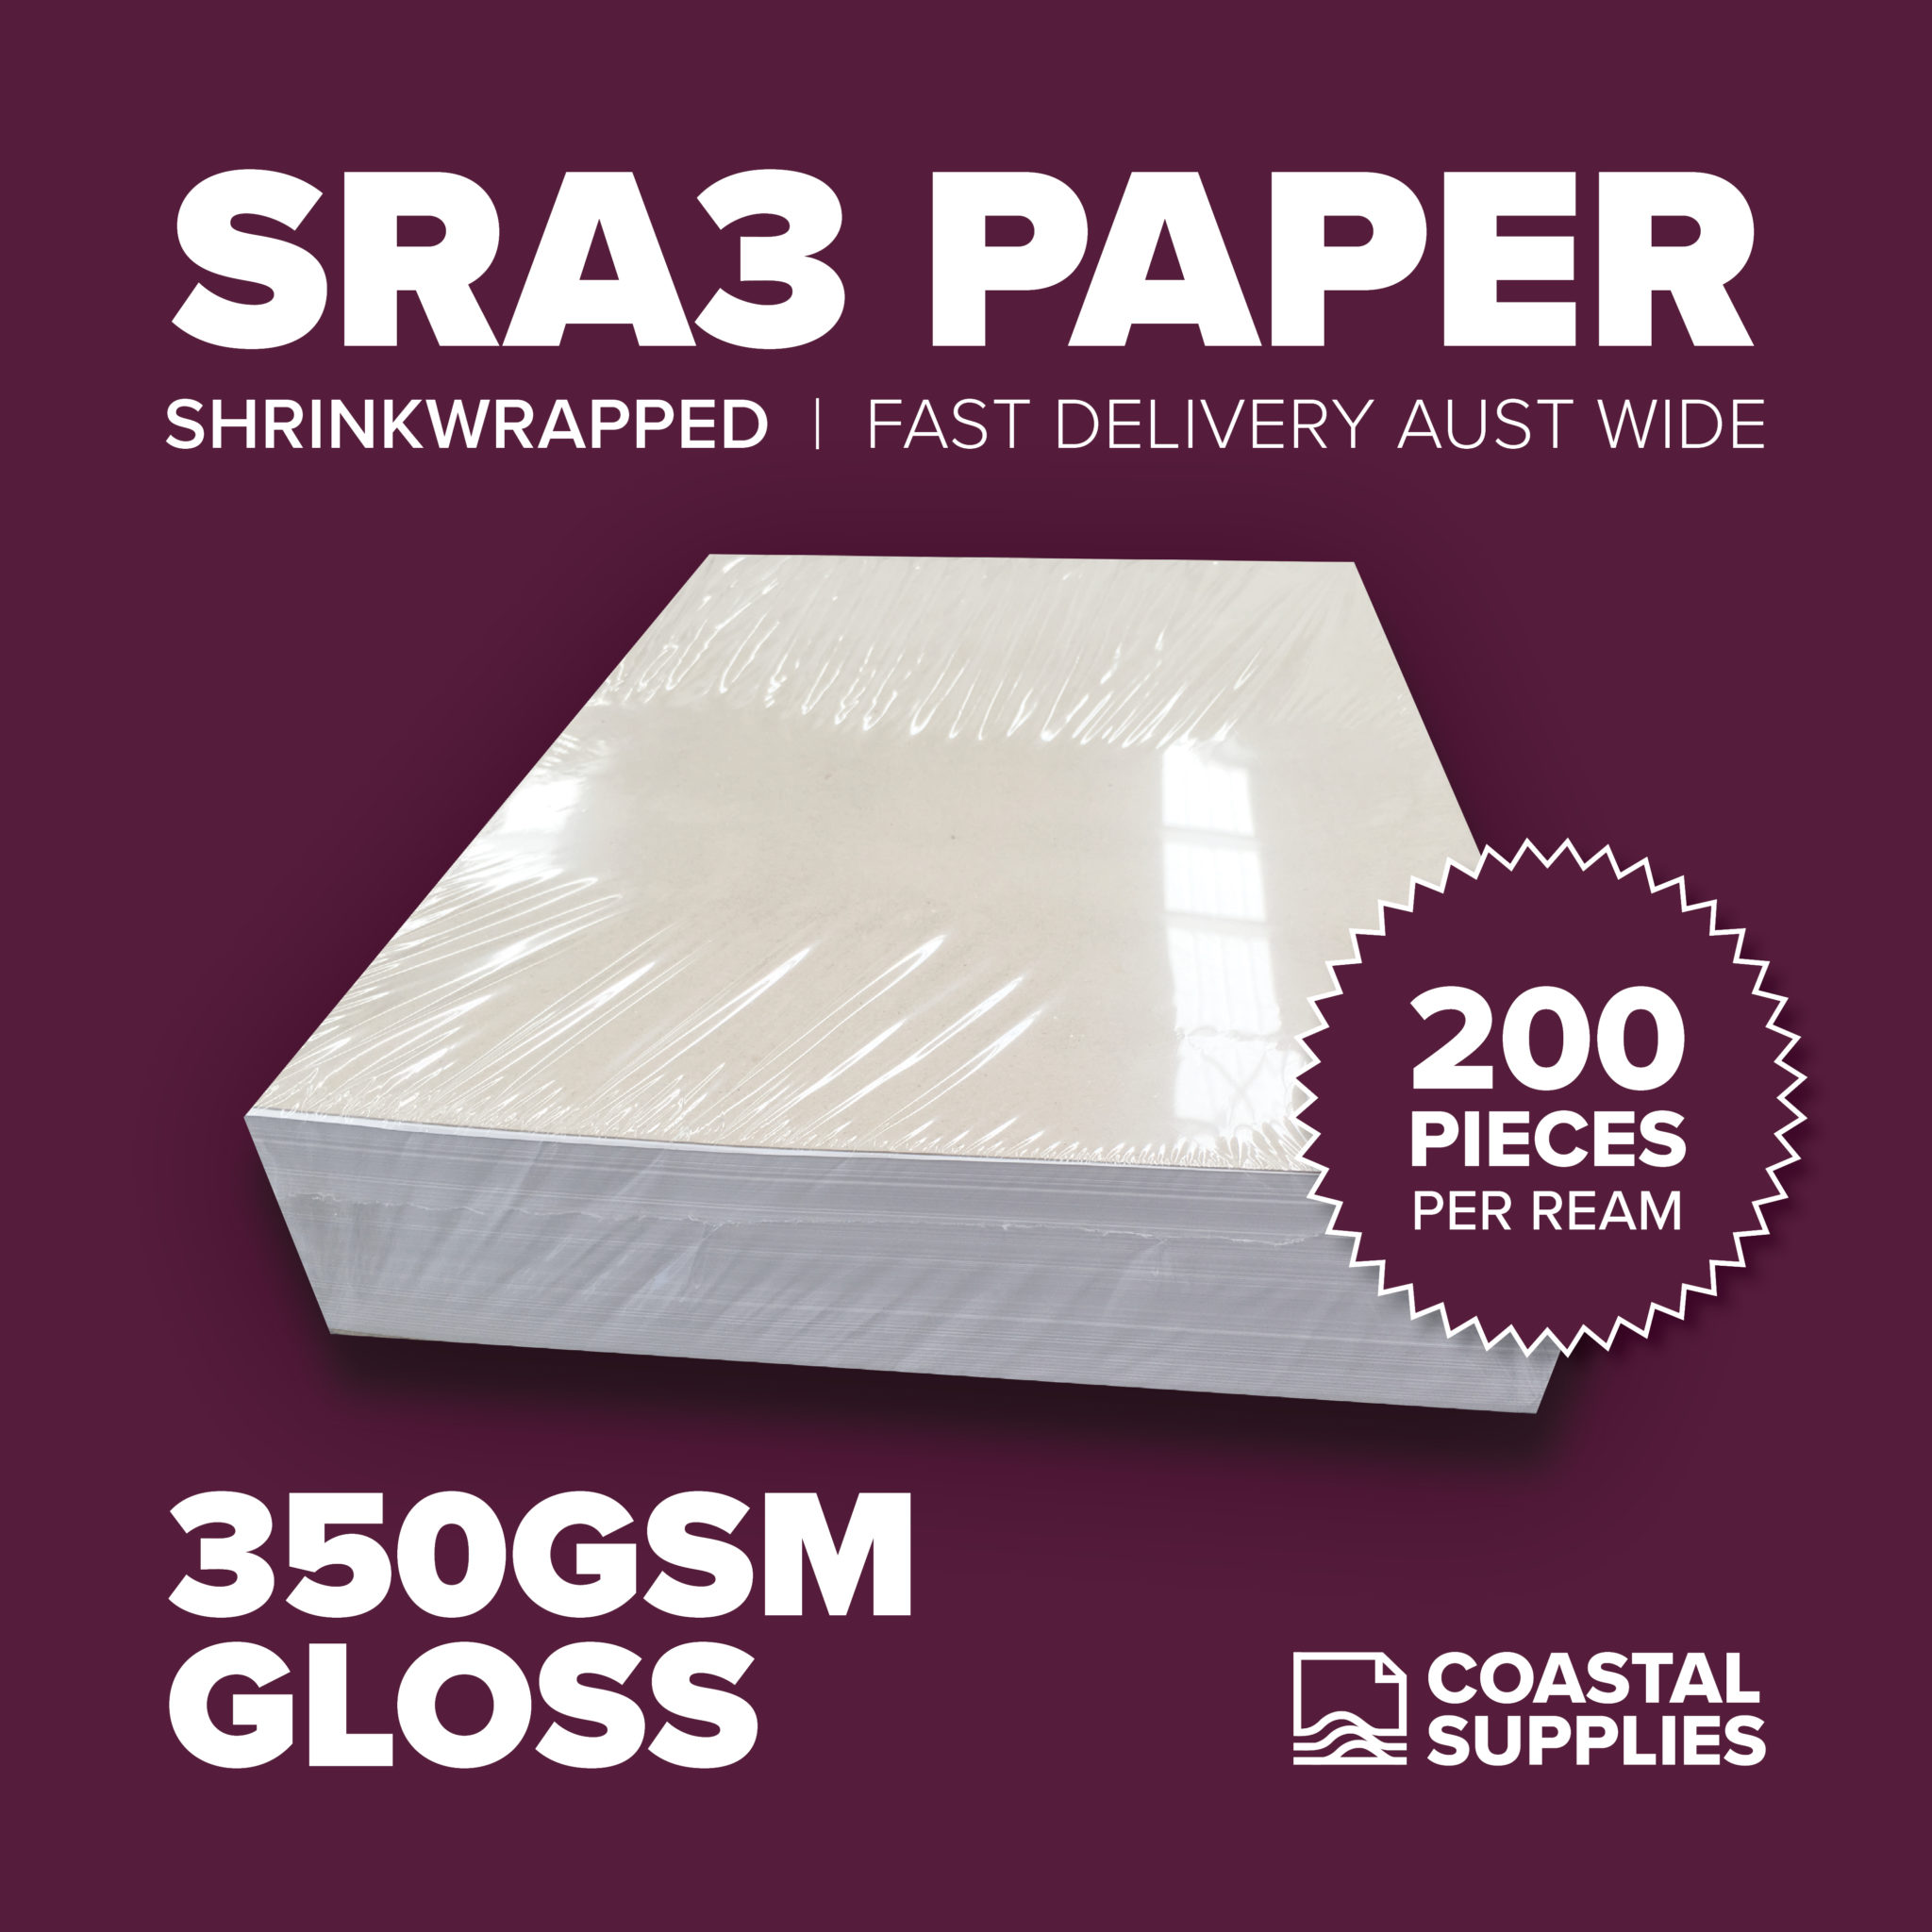 350gsm-gloss-sra3-paper-coastal-supplies-paper-products